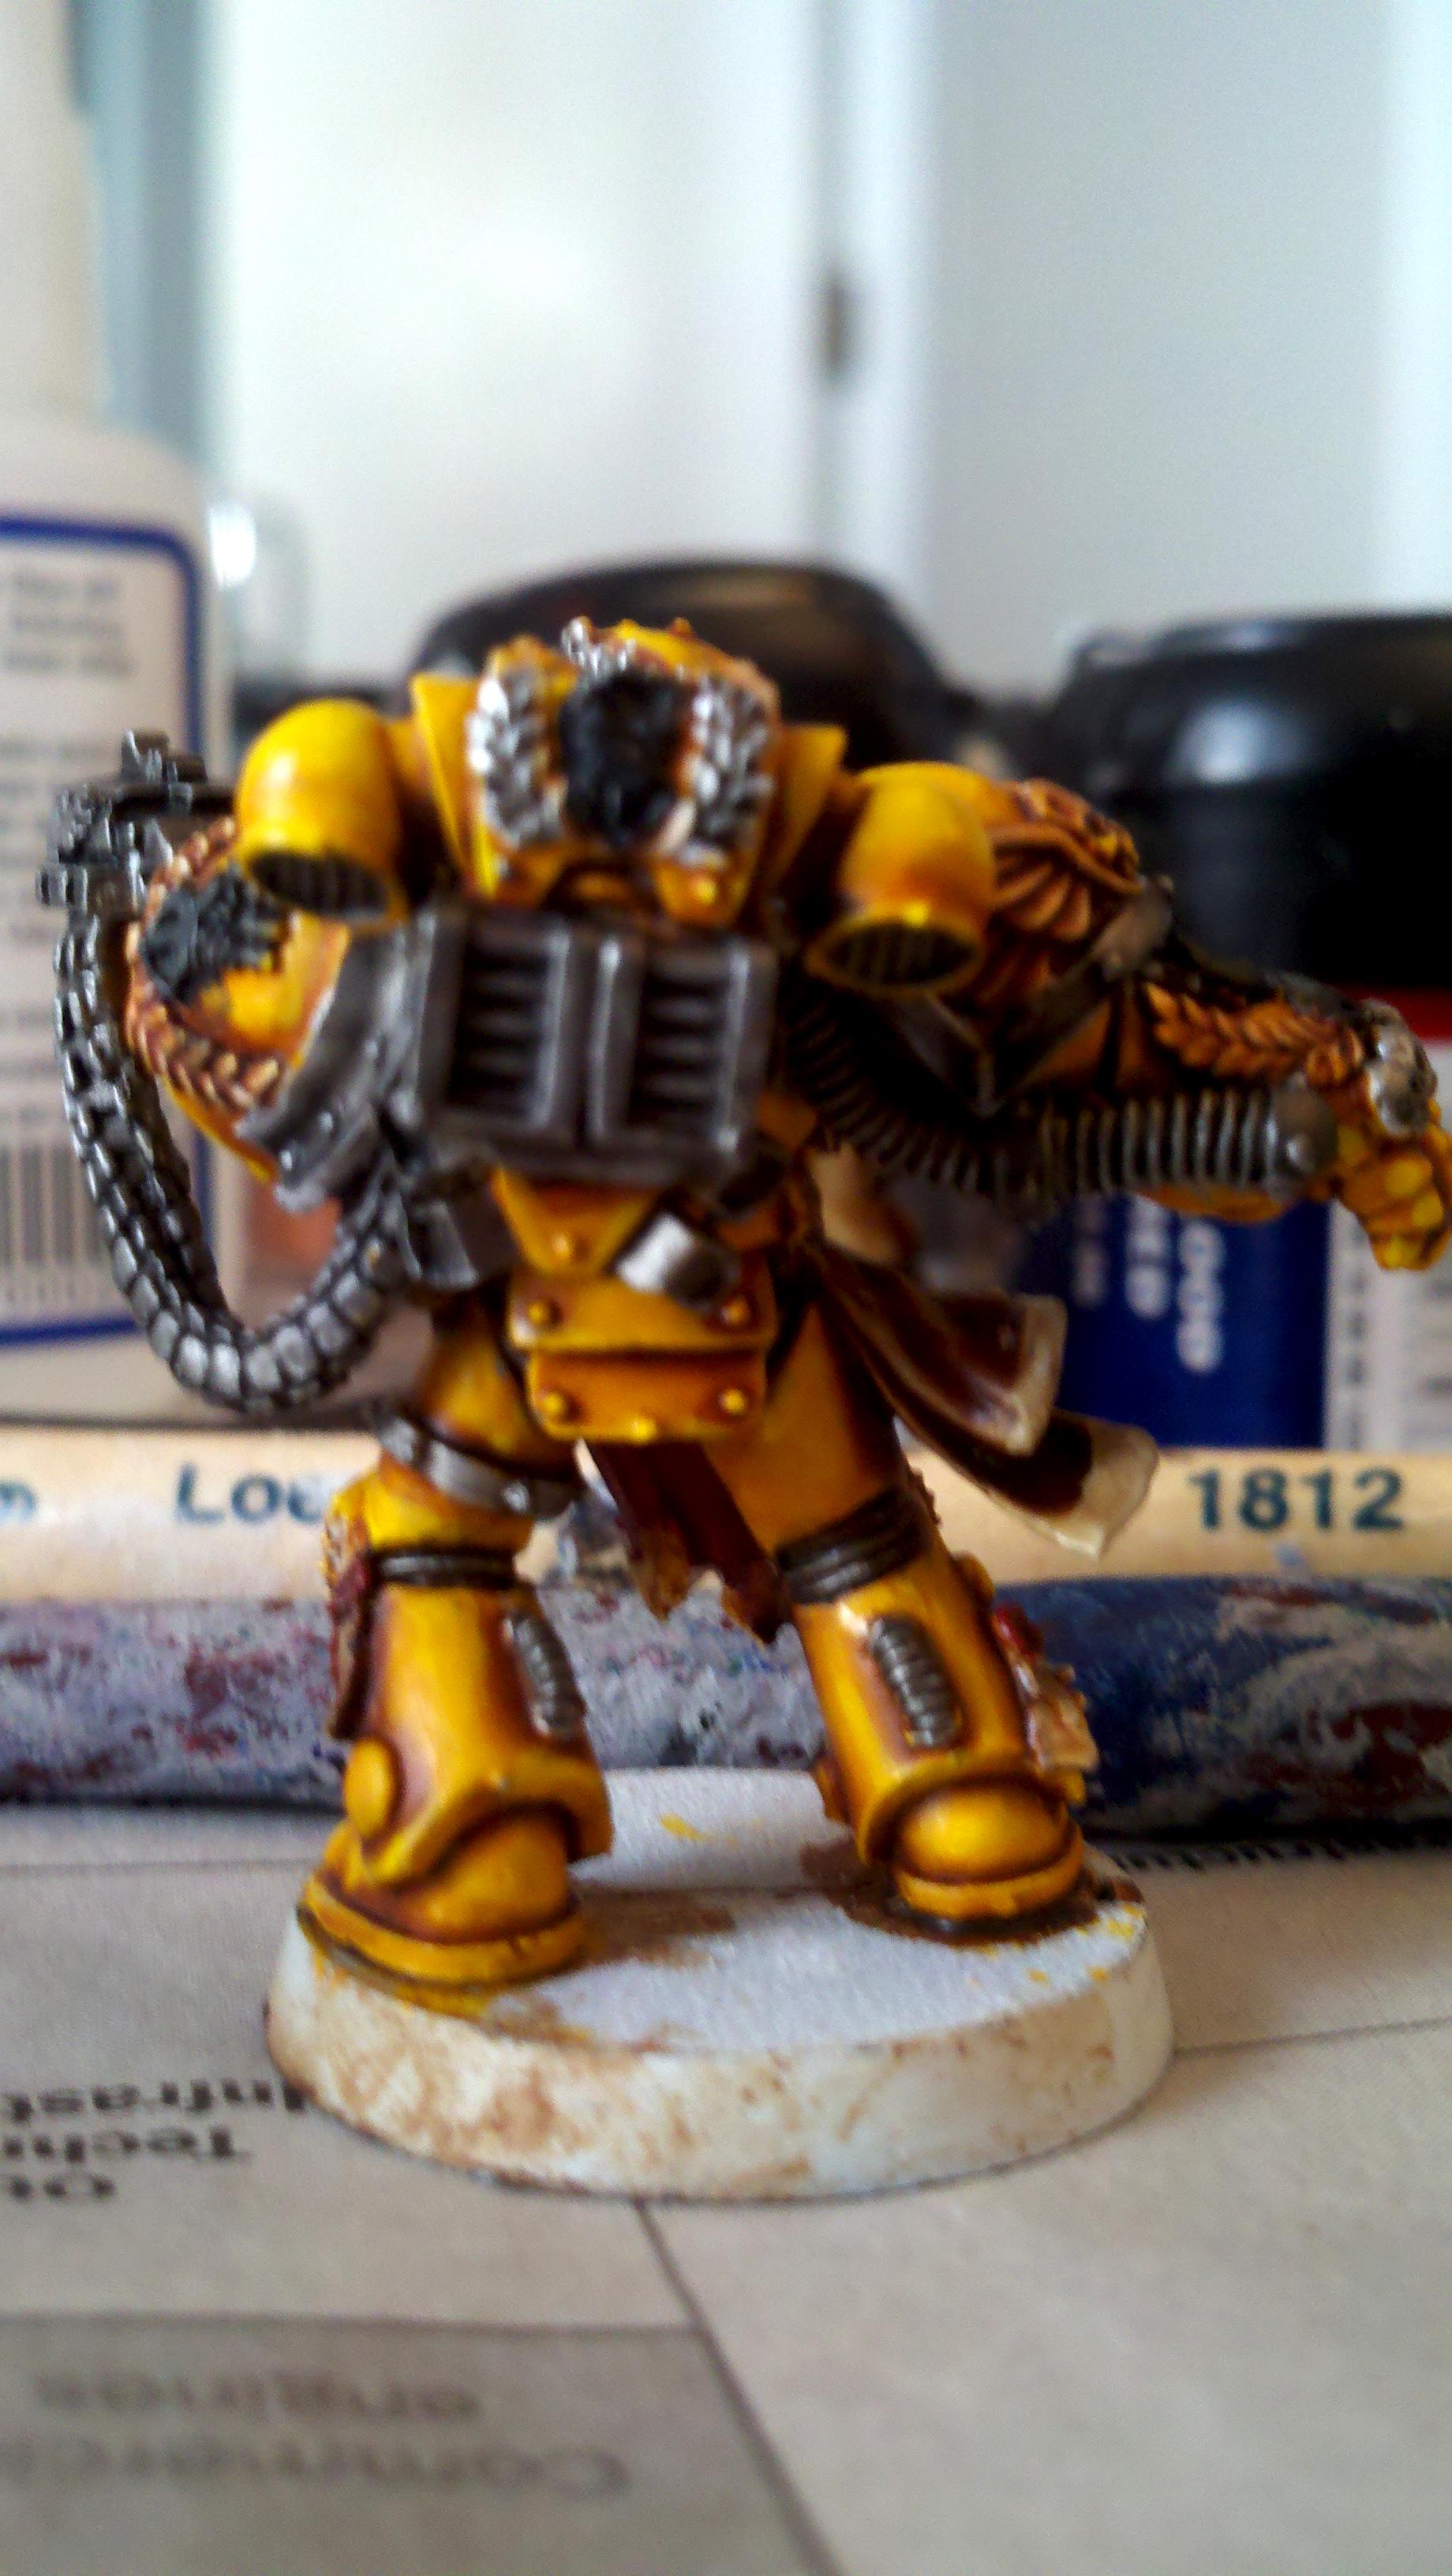 Imperial Fists, Space Marines, Warhammer 40,000